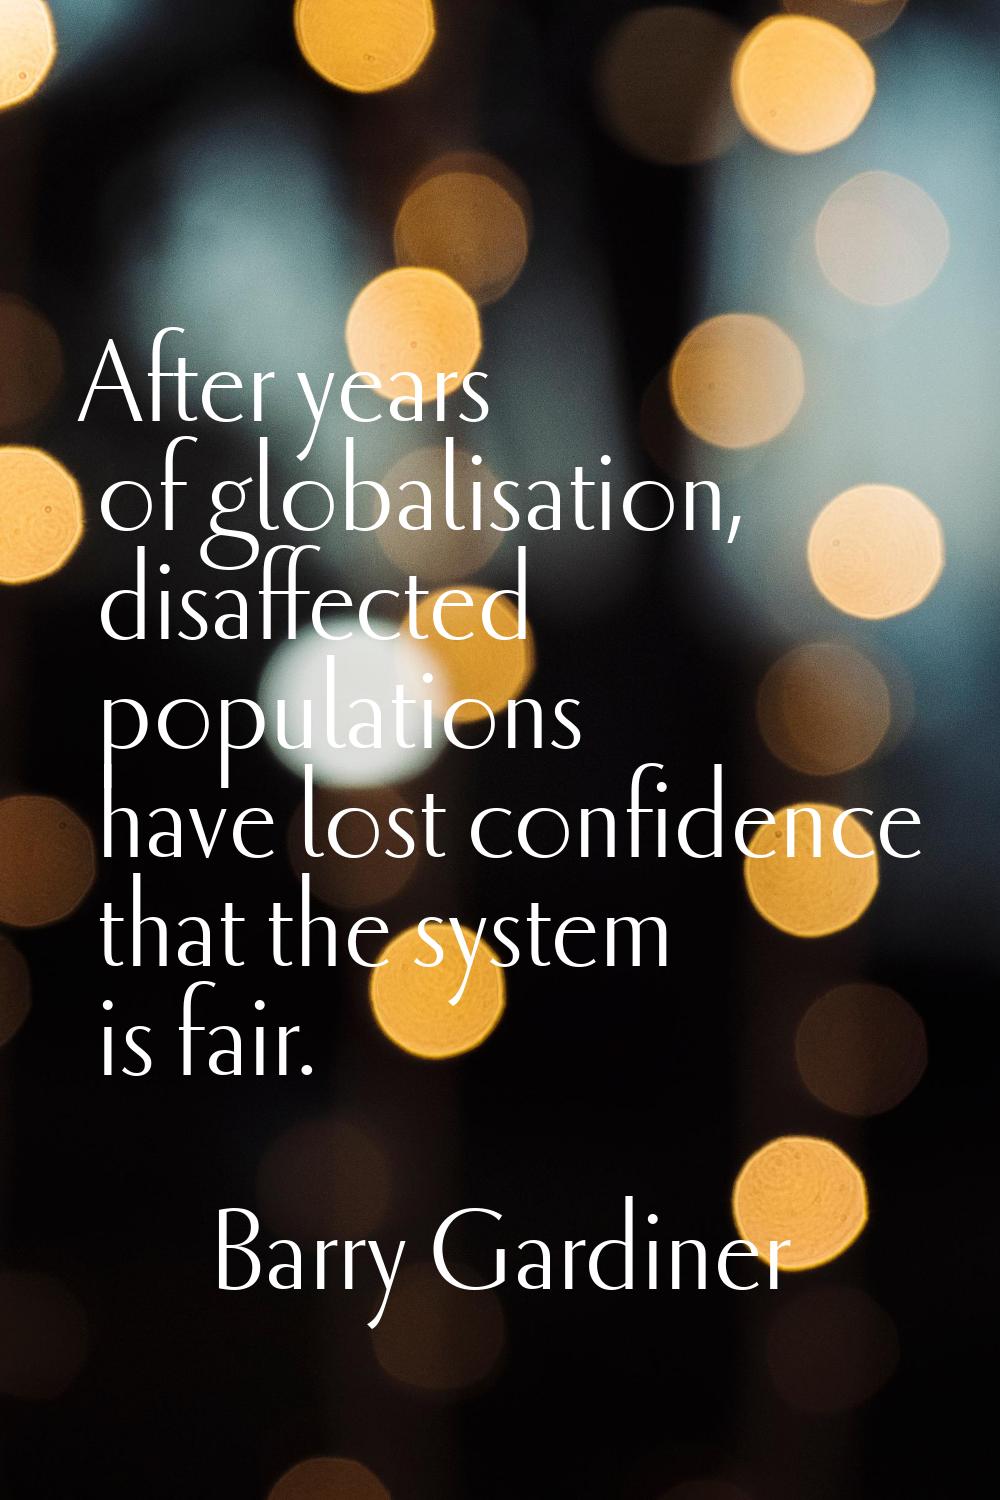 After years of globalisation, disaffected populations have lost confidence that the system is fair.